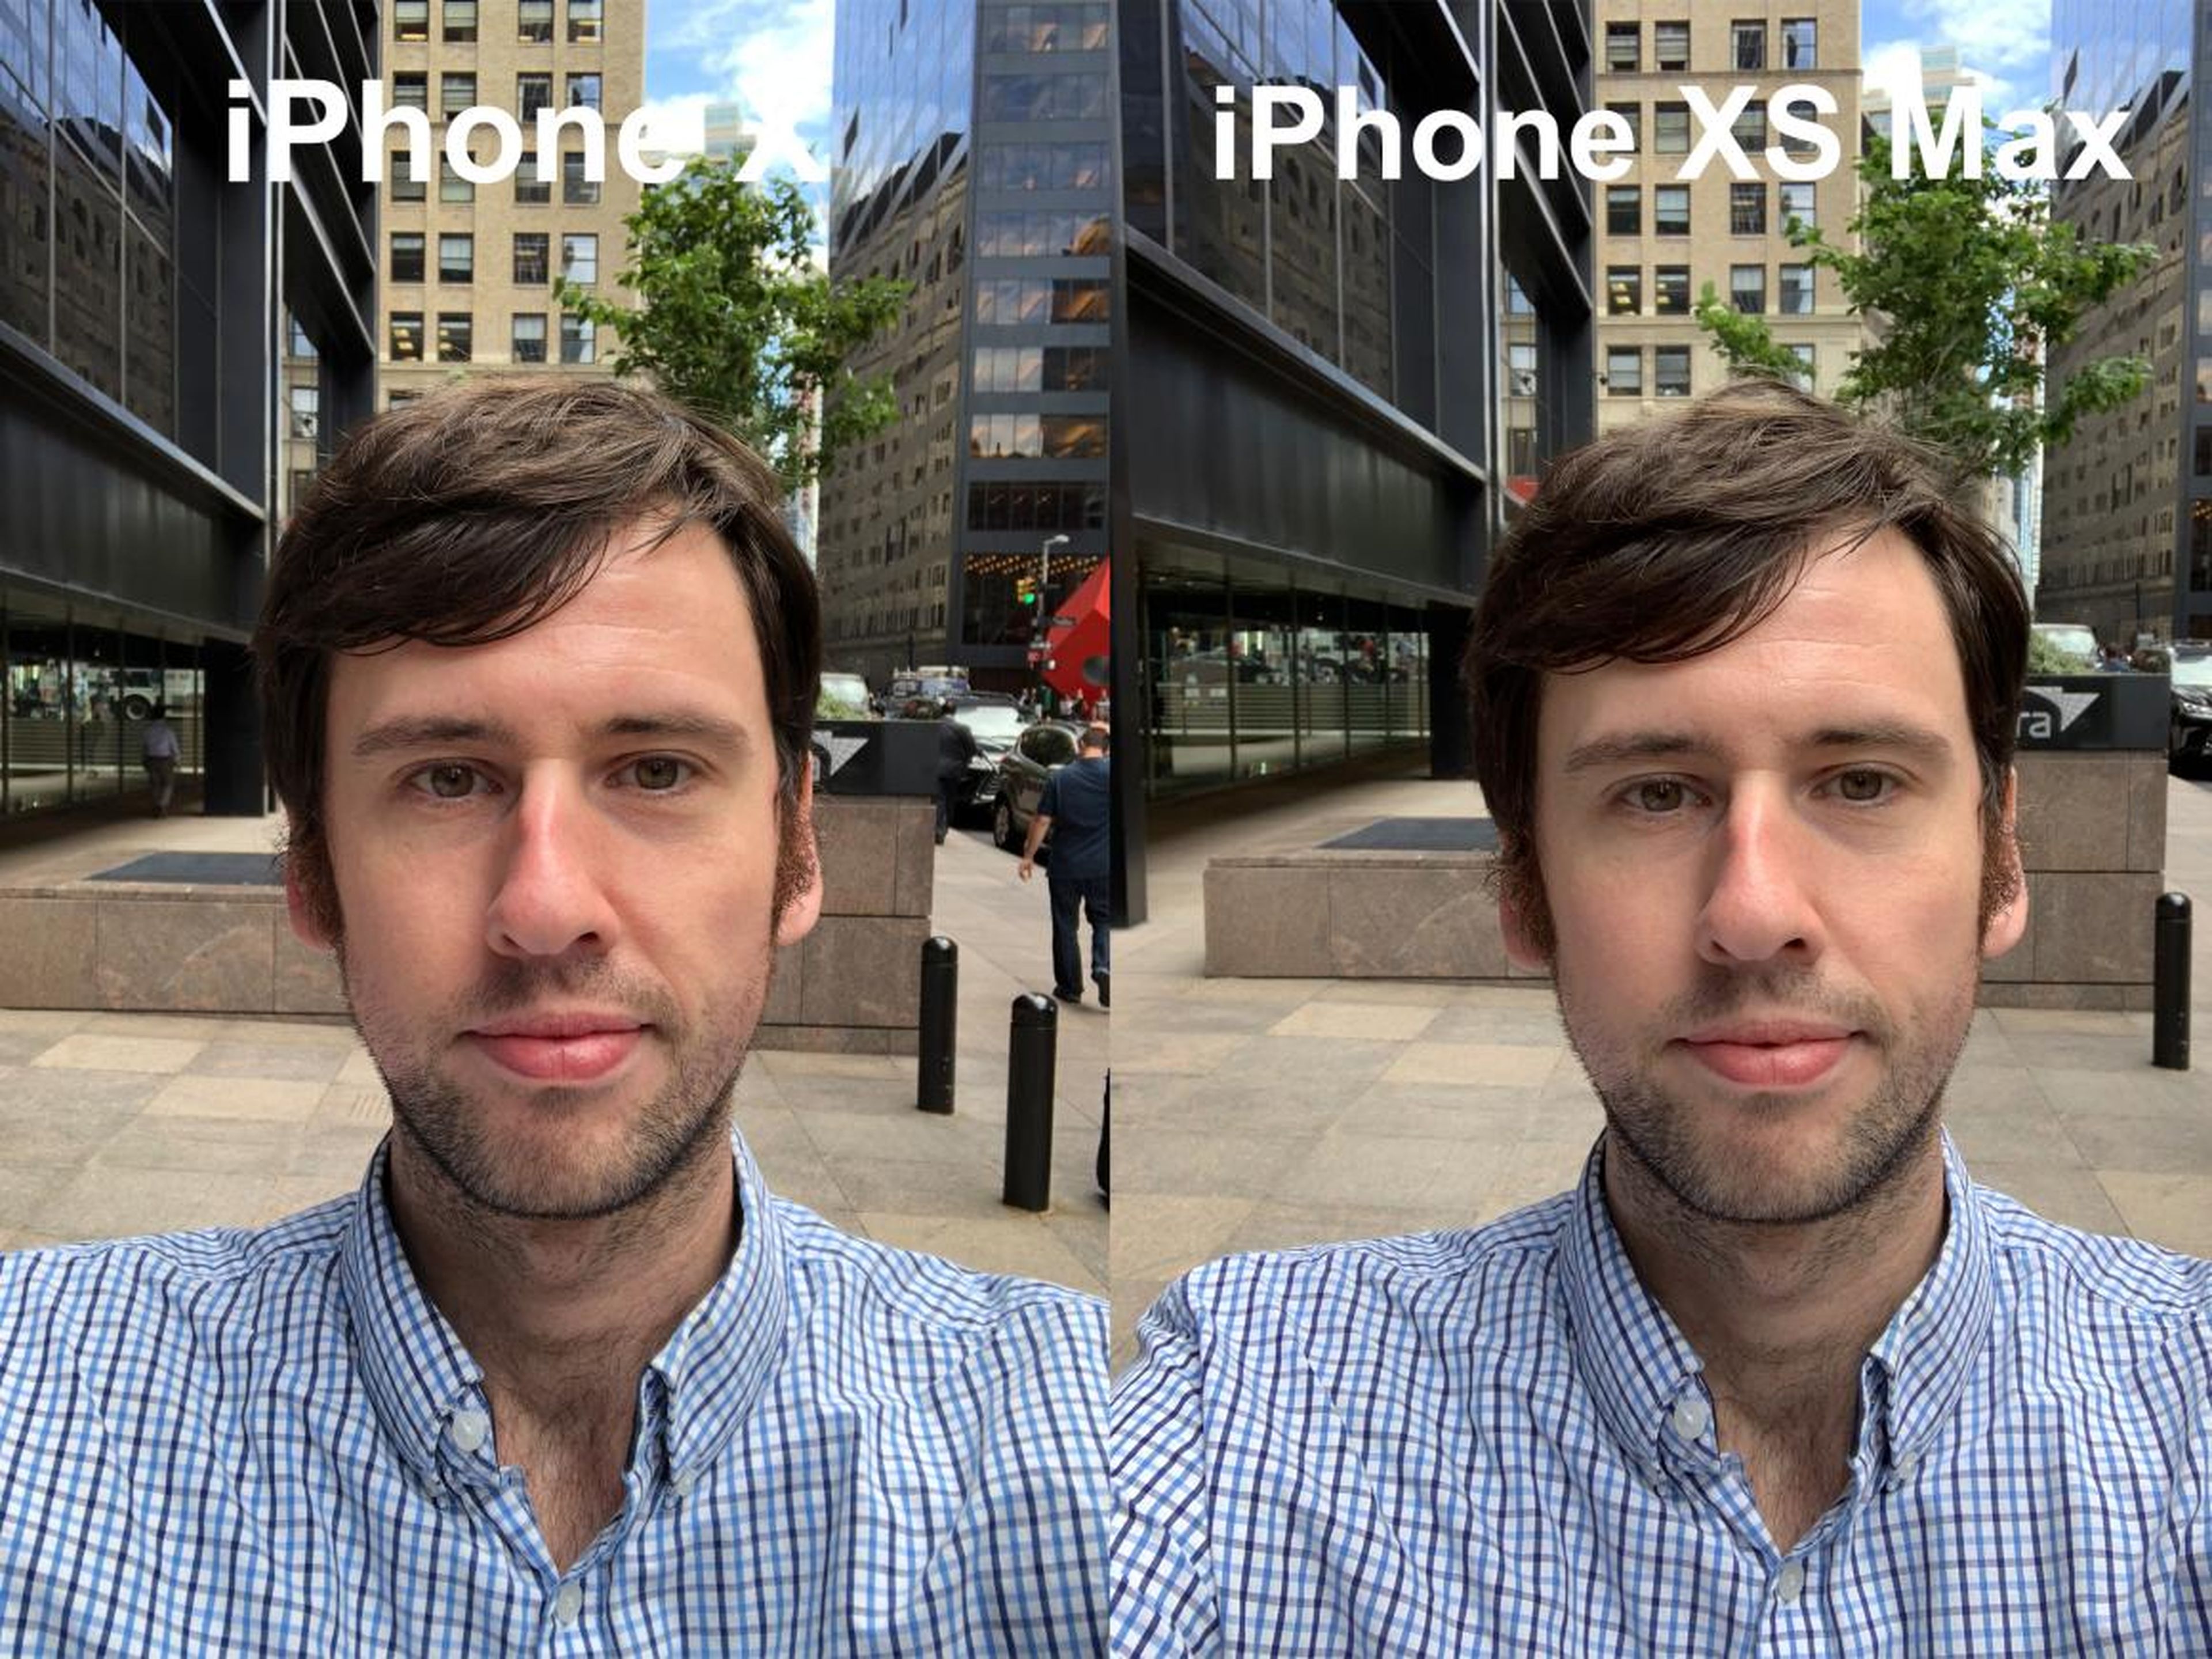 There's a little bit of smoothing going on here, as well as some color uniformity on the iPhone XS' selfie.